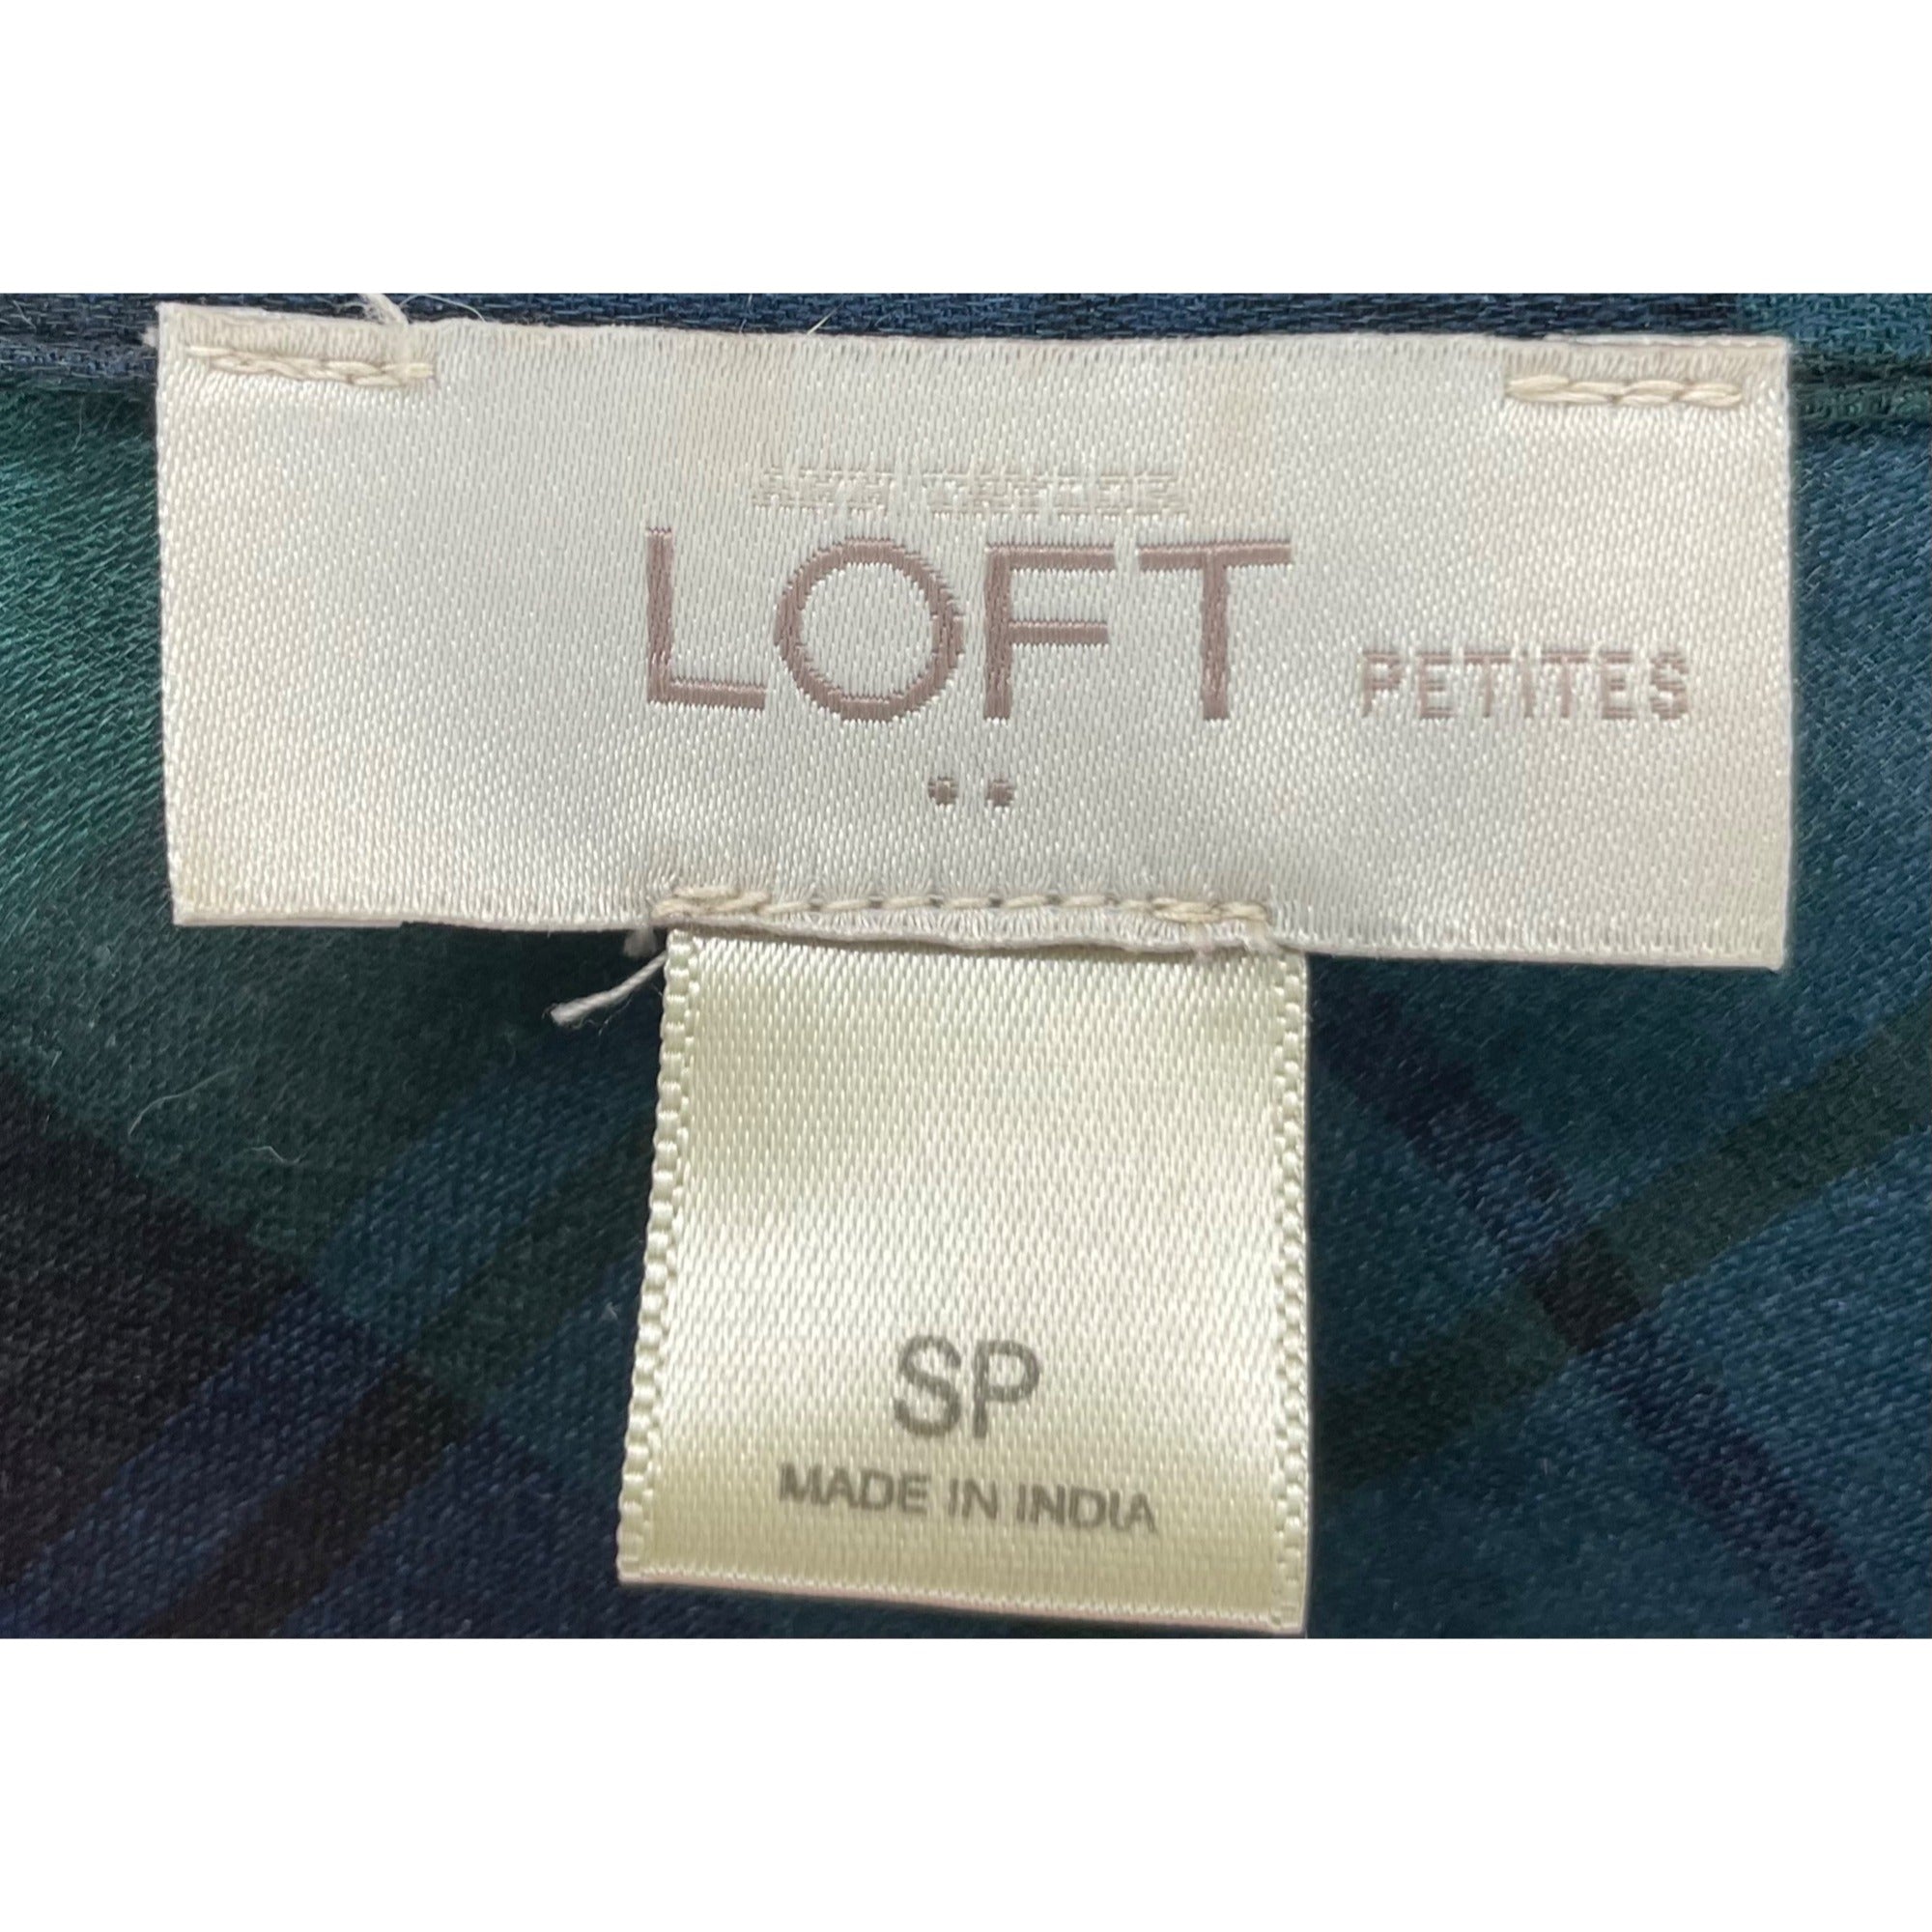 LOFT Women’s SP Navy and Forest Green Plaid Button-Down Top